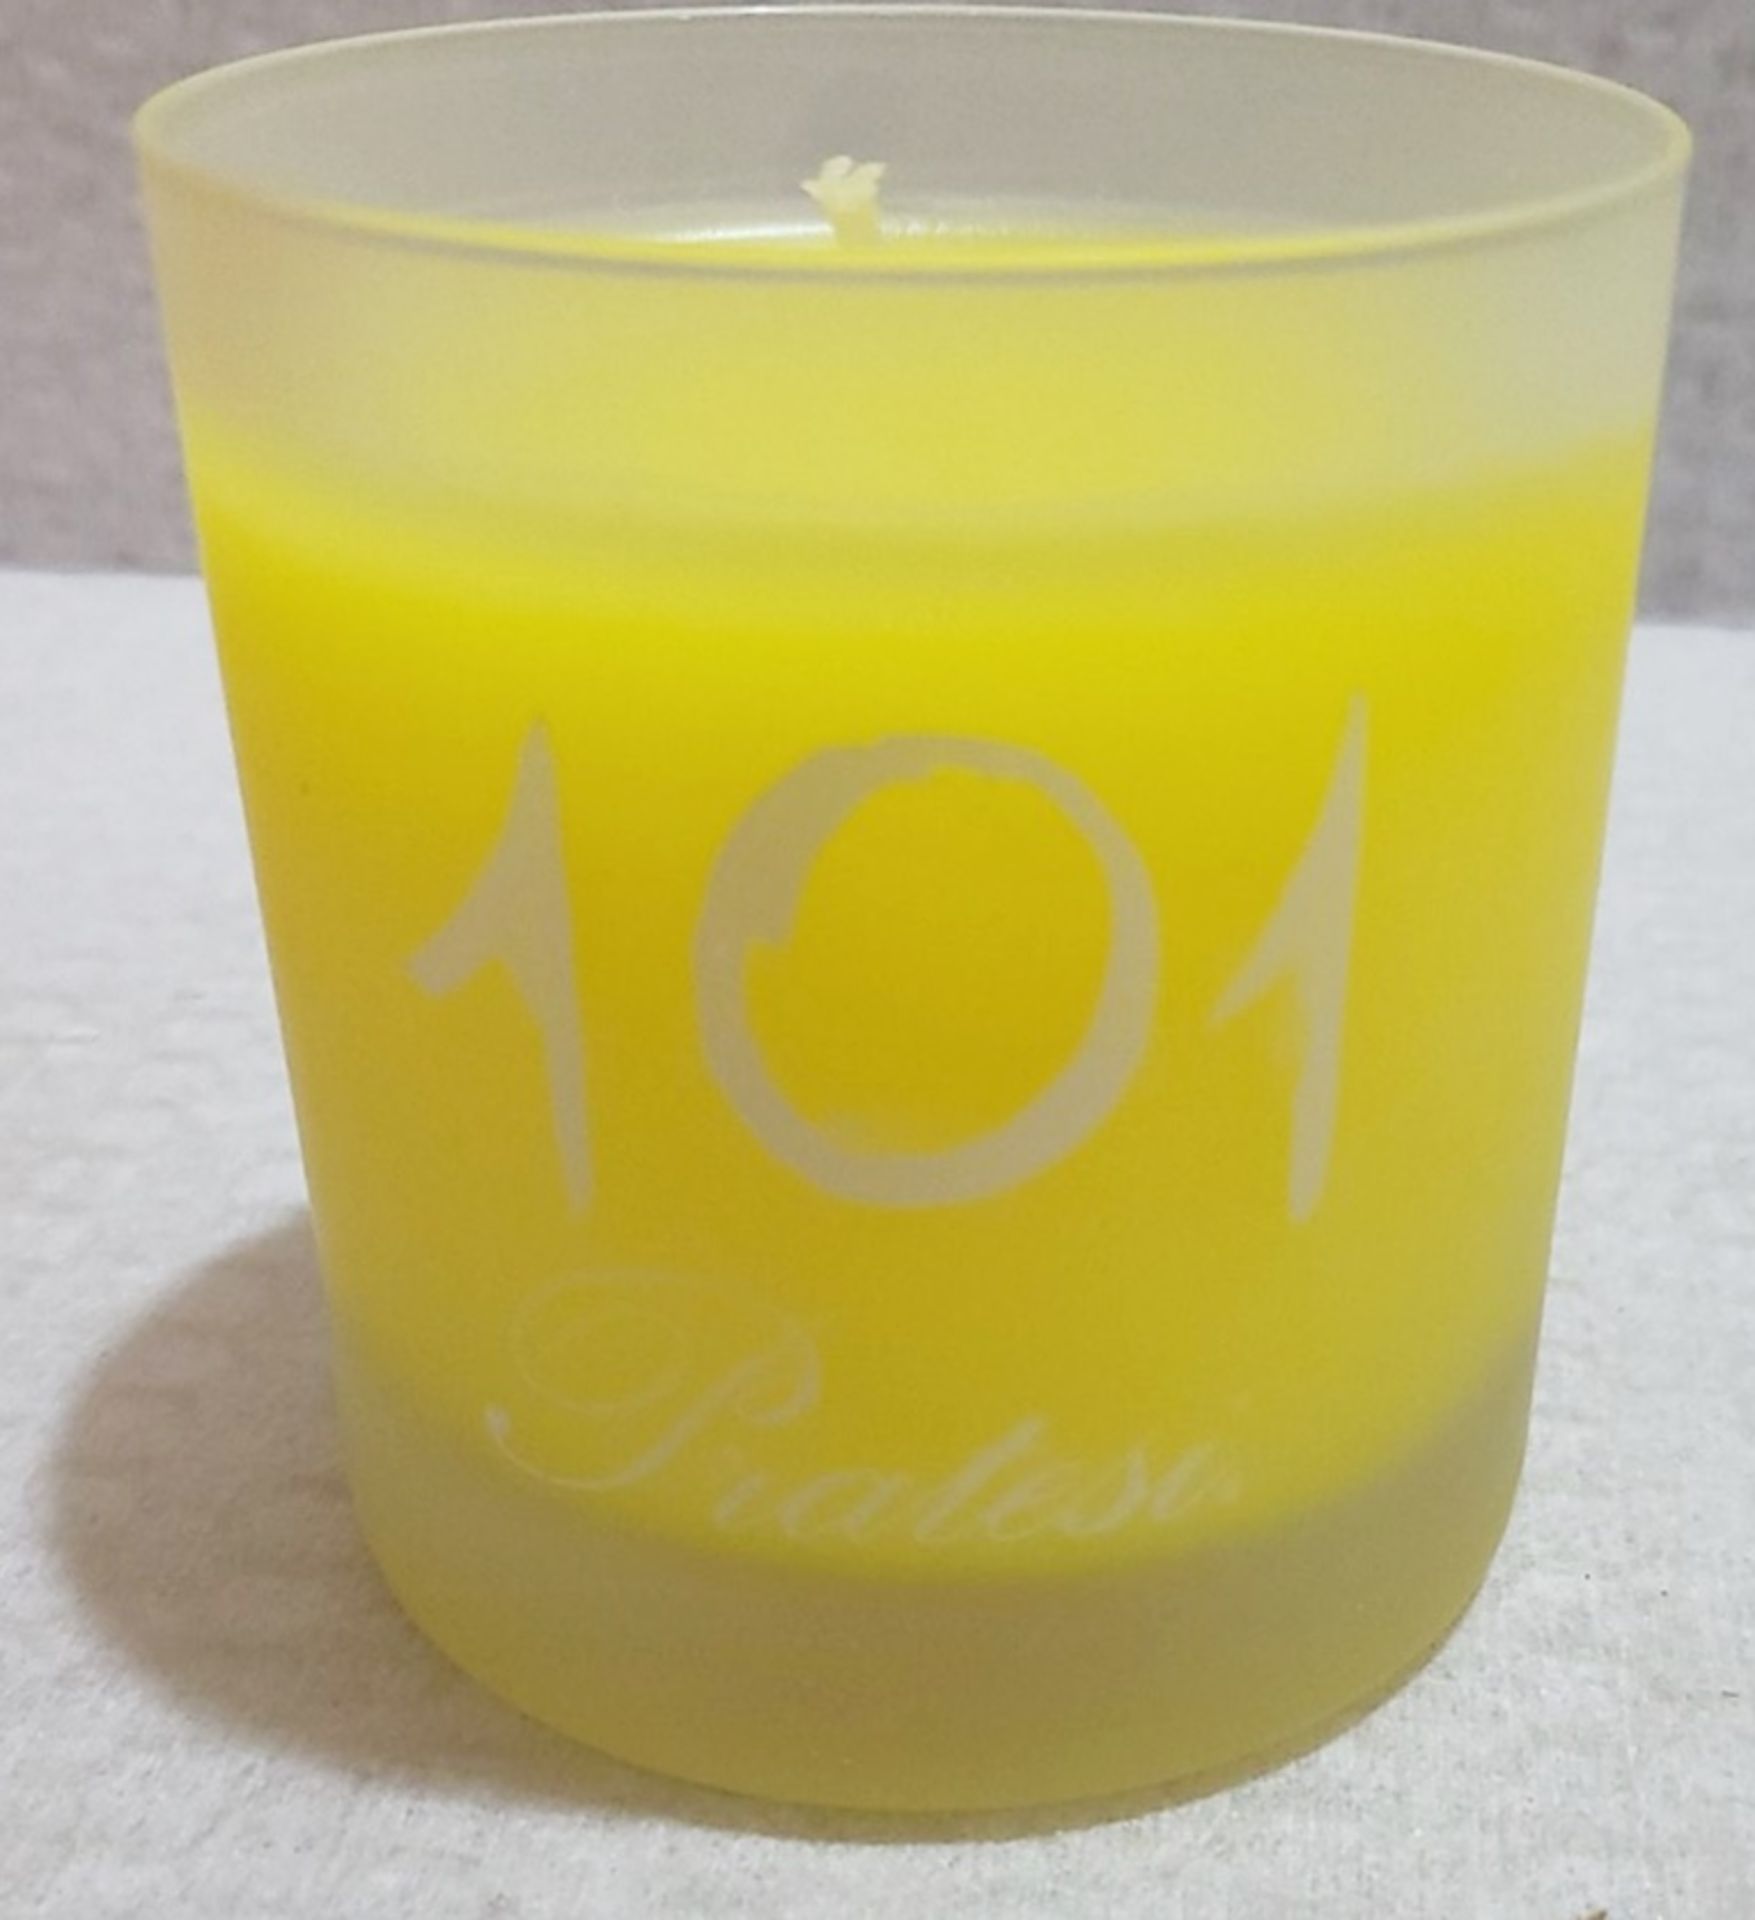 1 x PRATESI 101 Celebration Gialle In Fiore Scented Candle With Glass Holder And Aluminium Lid 200g - Image 2 of 6